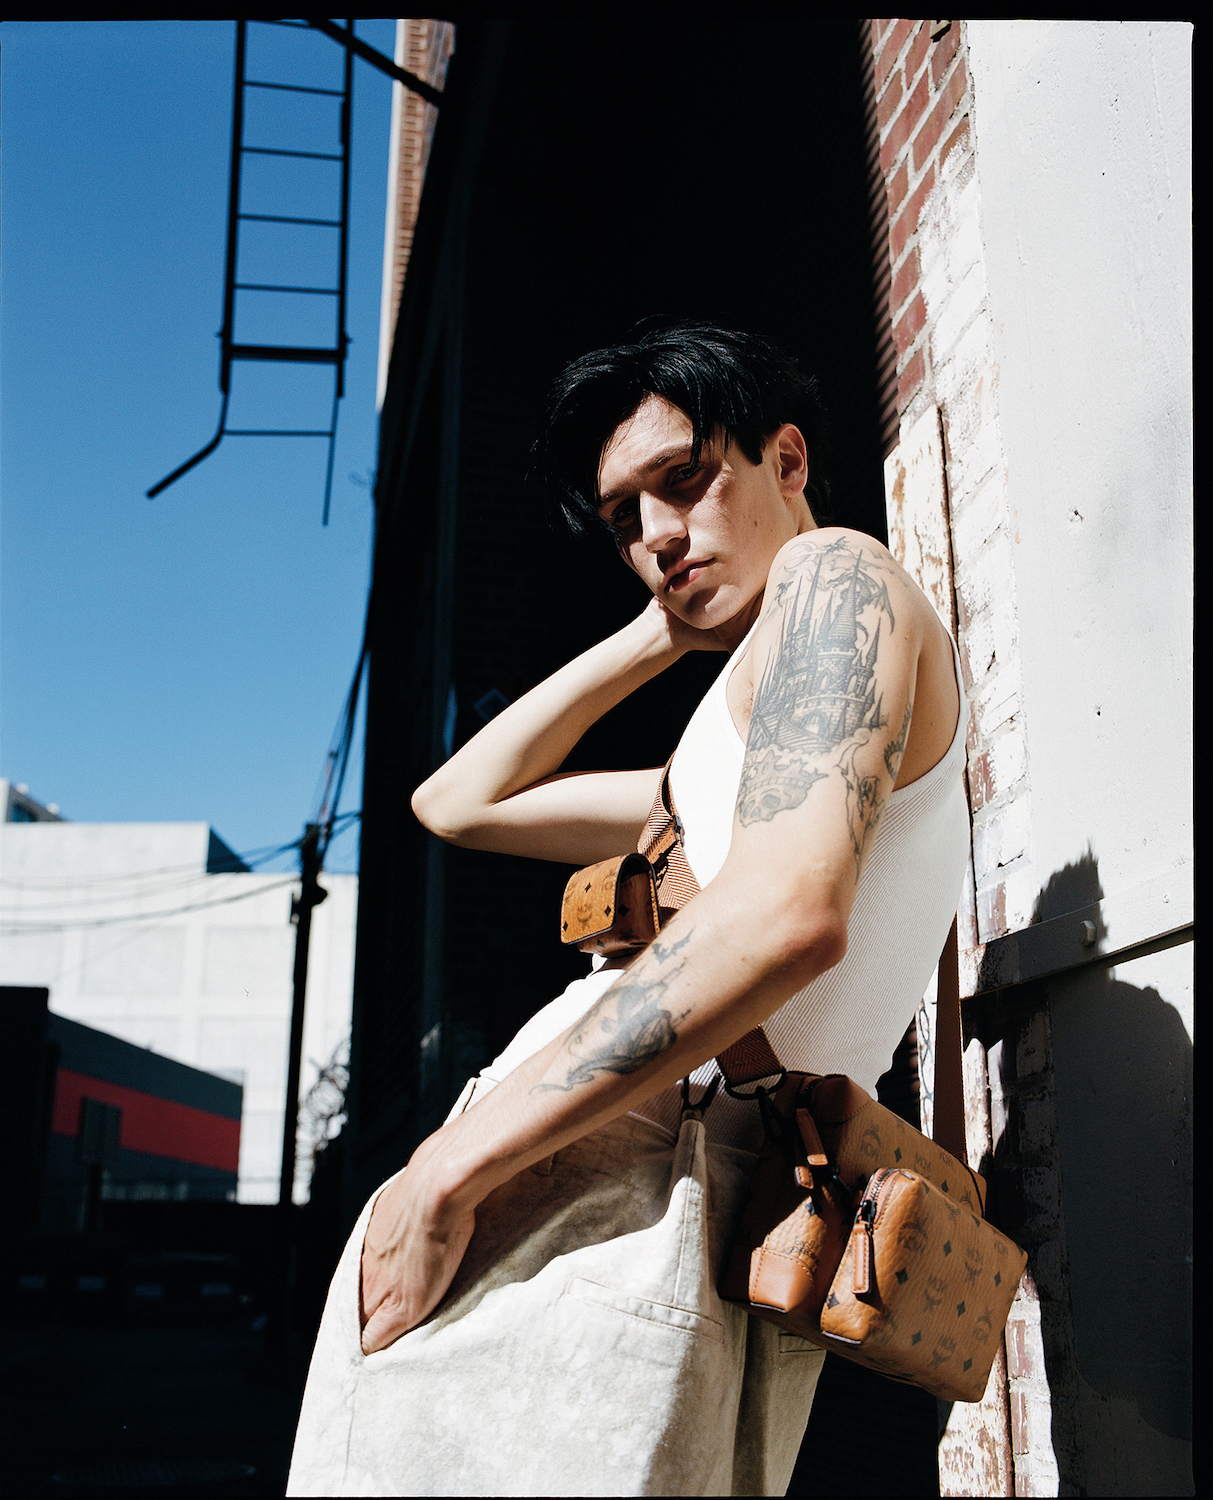  Huddy wears pants Our Legacy, bag MCM, tank top stylist’s own, on hair OUAI Matte Pomade